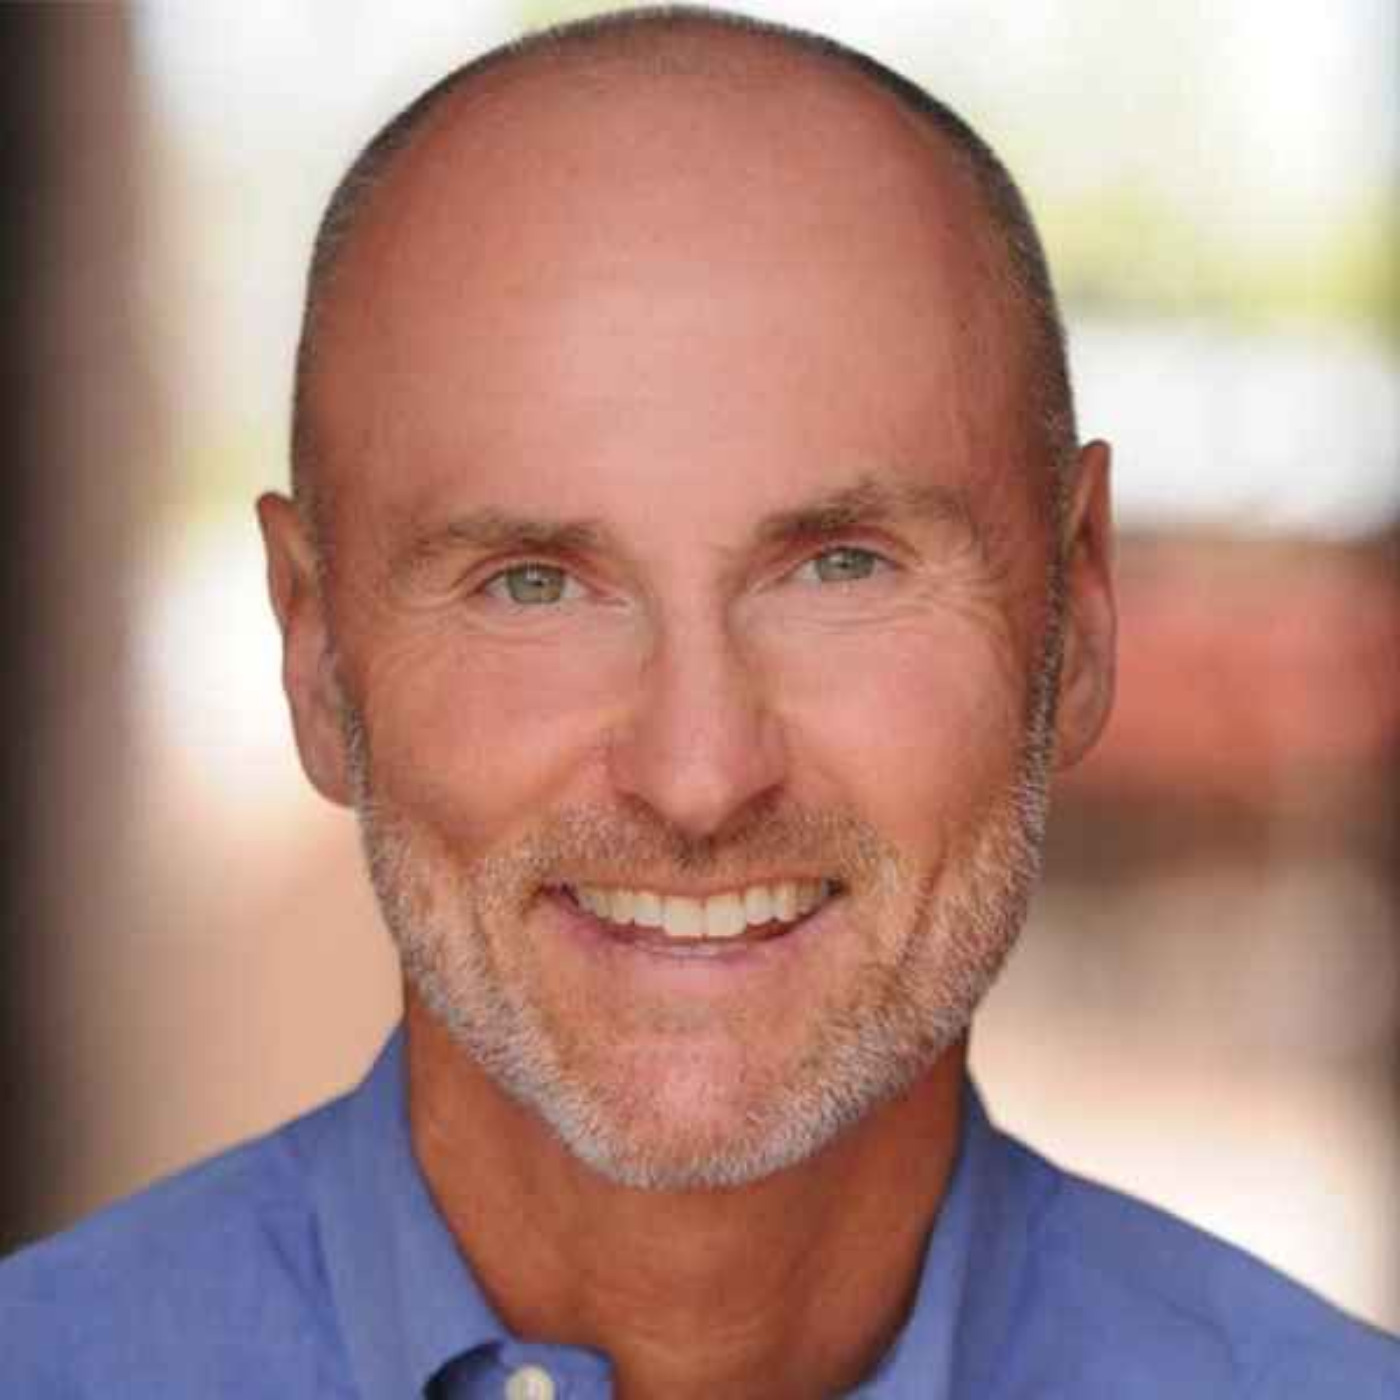 766: Chip Conley, part 1: Learning to Love Midlife